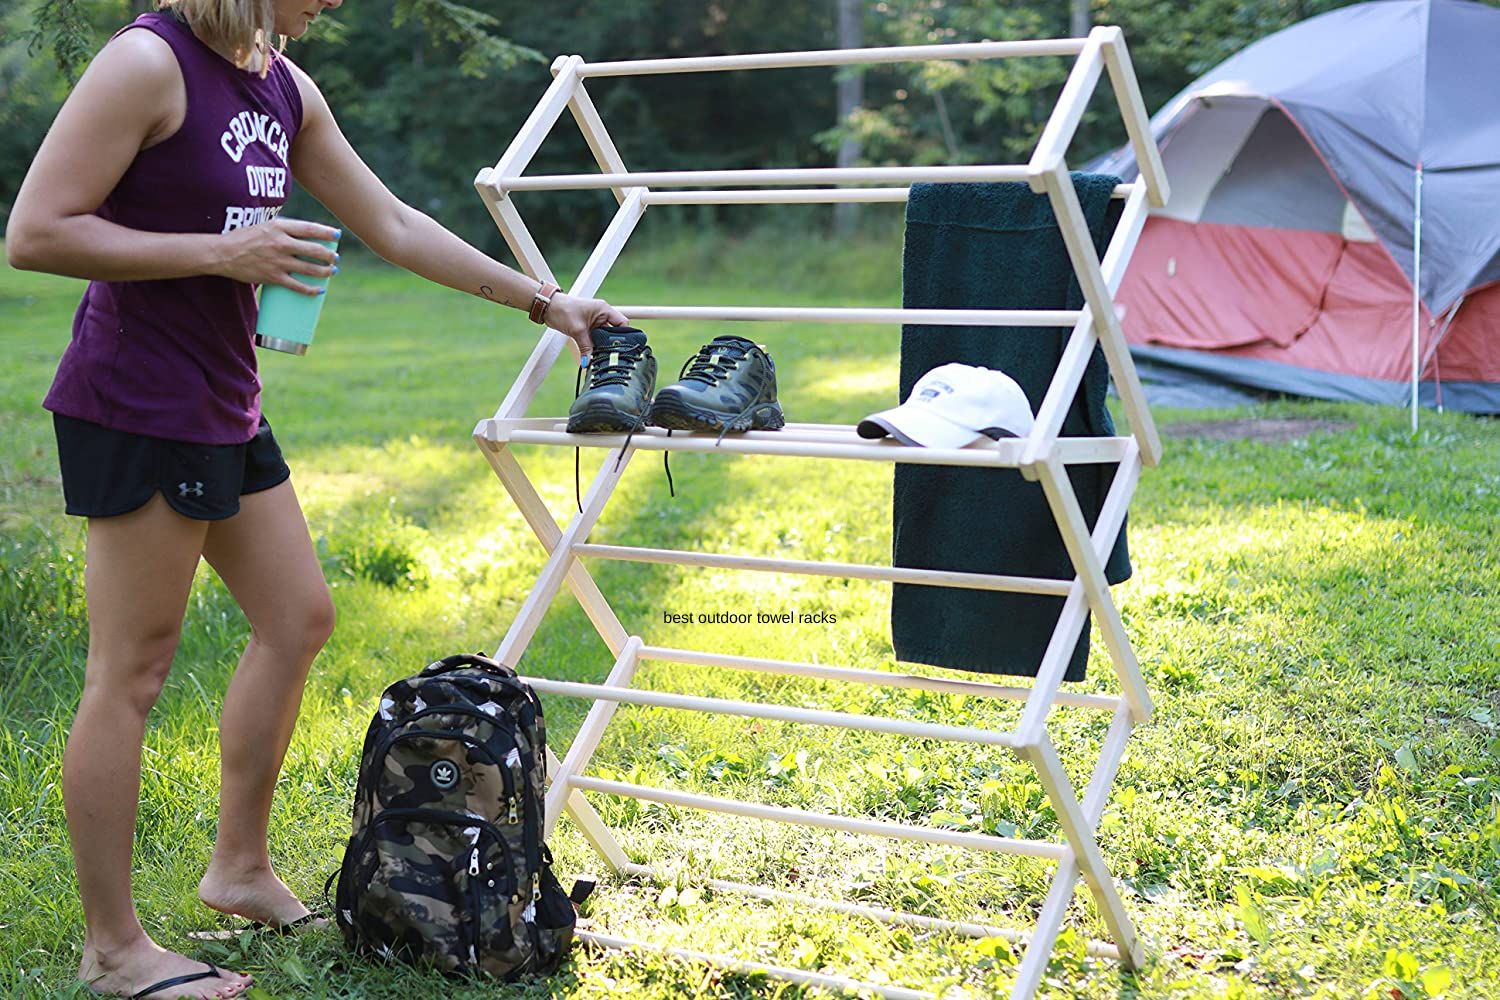 The Best Outdoor Towel Racks Option storing a towel, hat, and shoes at a campsite